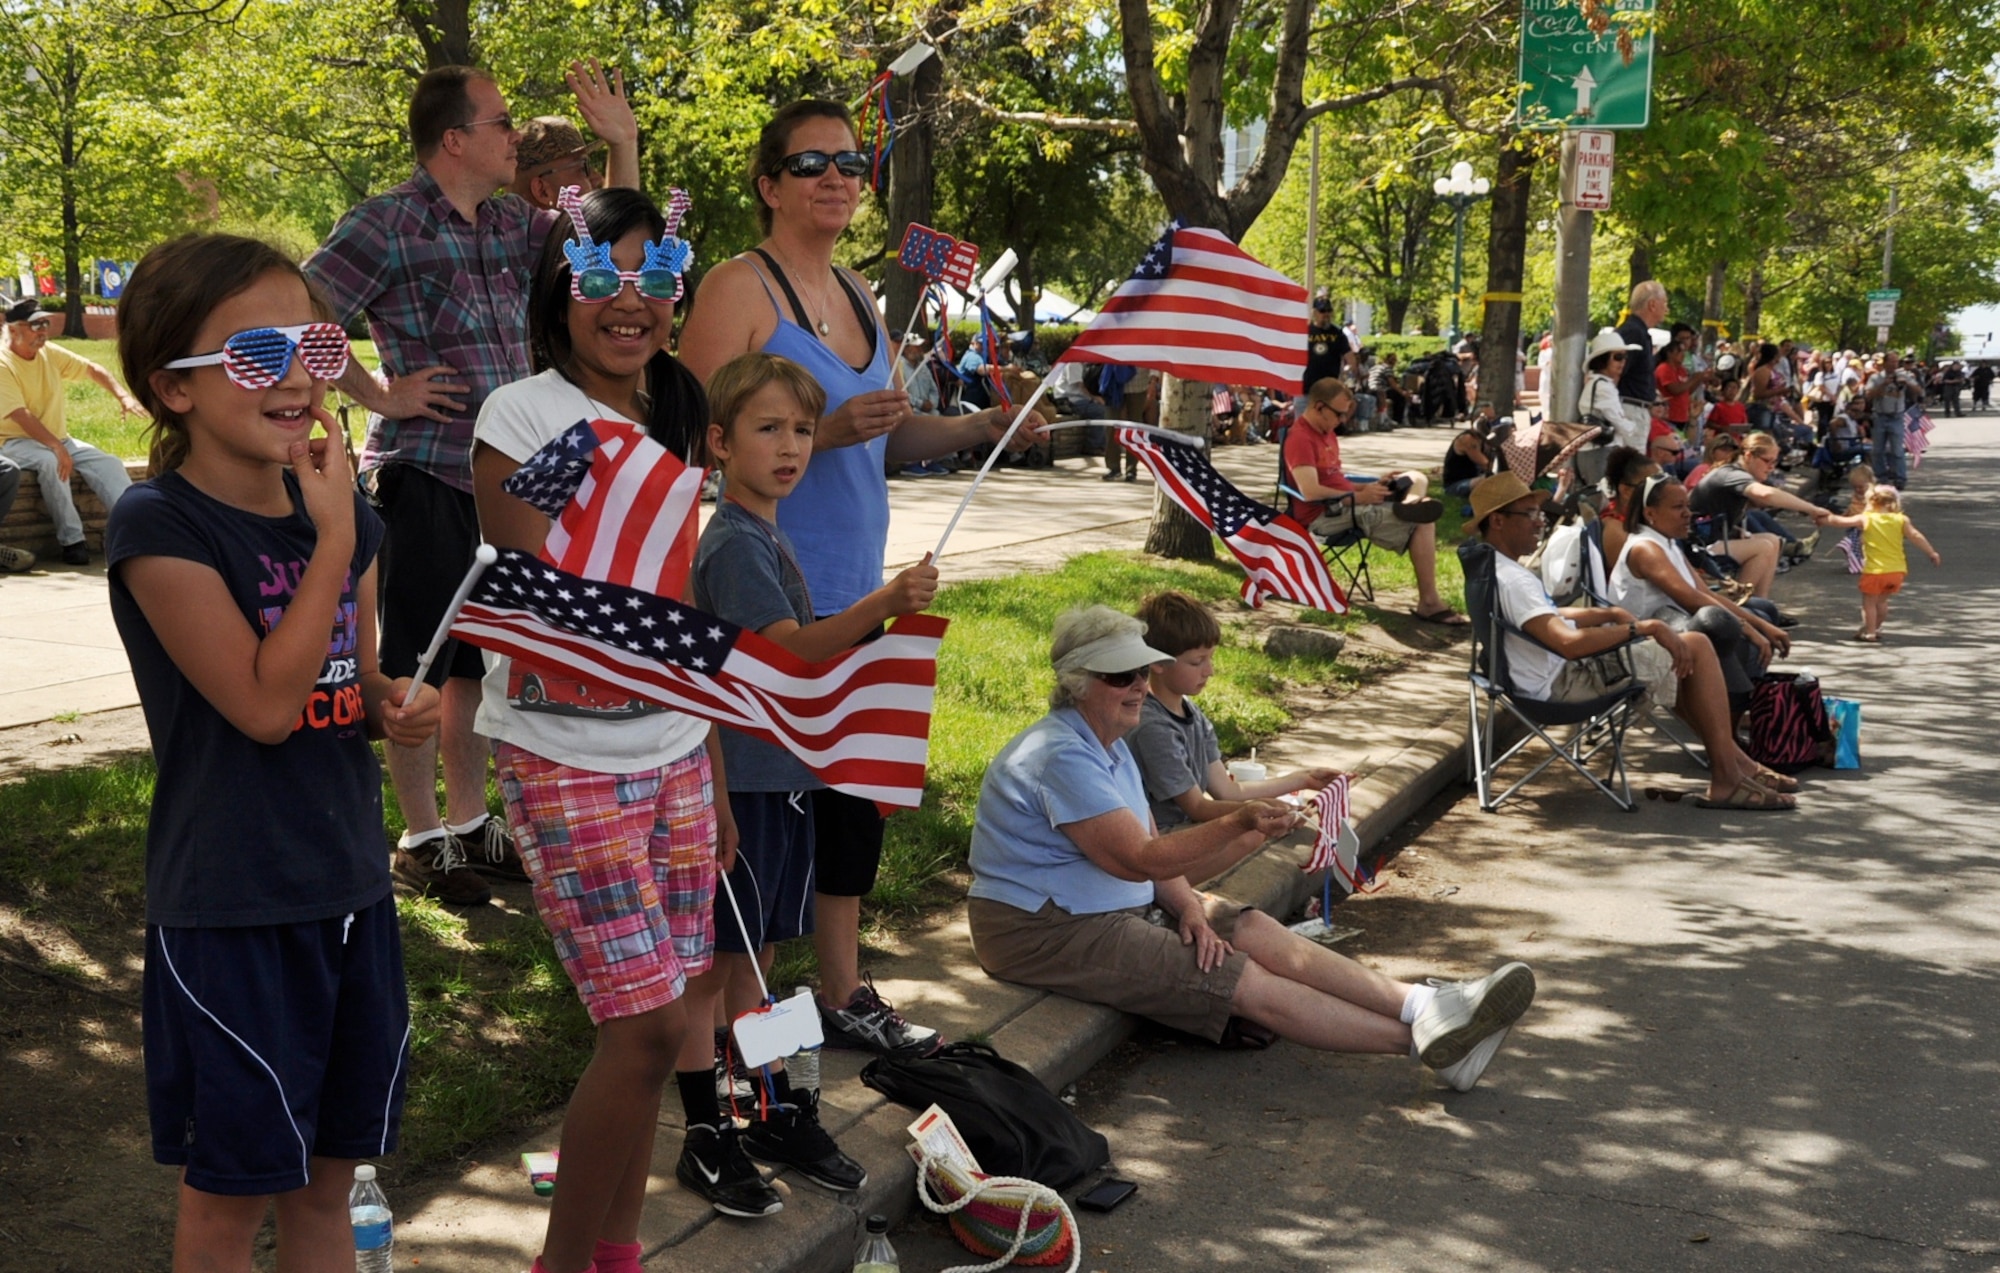 Spectators fly flags and wave during the 2013 Memorial Day Parade May 25, 2013, in Denver. Numerous spectators lined the streets near Civic Center Park to watch the approximately 40 parade entries. The parade was followed by a Veterans Memorial Day Tribute at the Colorado Veterans Monument on Broadway Ave. (U.S. Air Force photo by Staff Sgt. Kali L. Gradishar/Released)